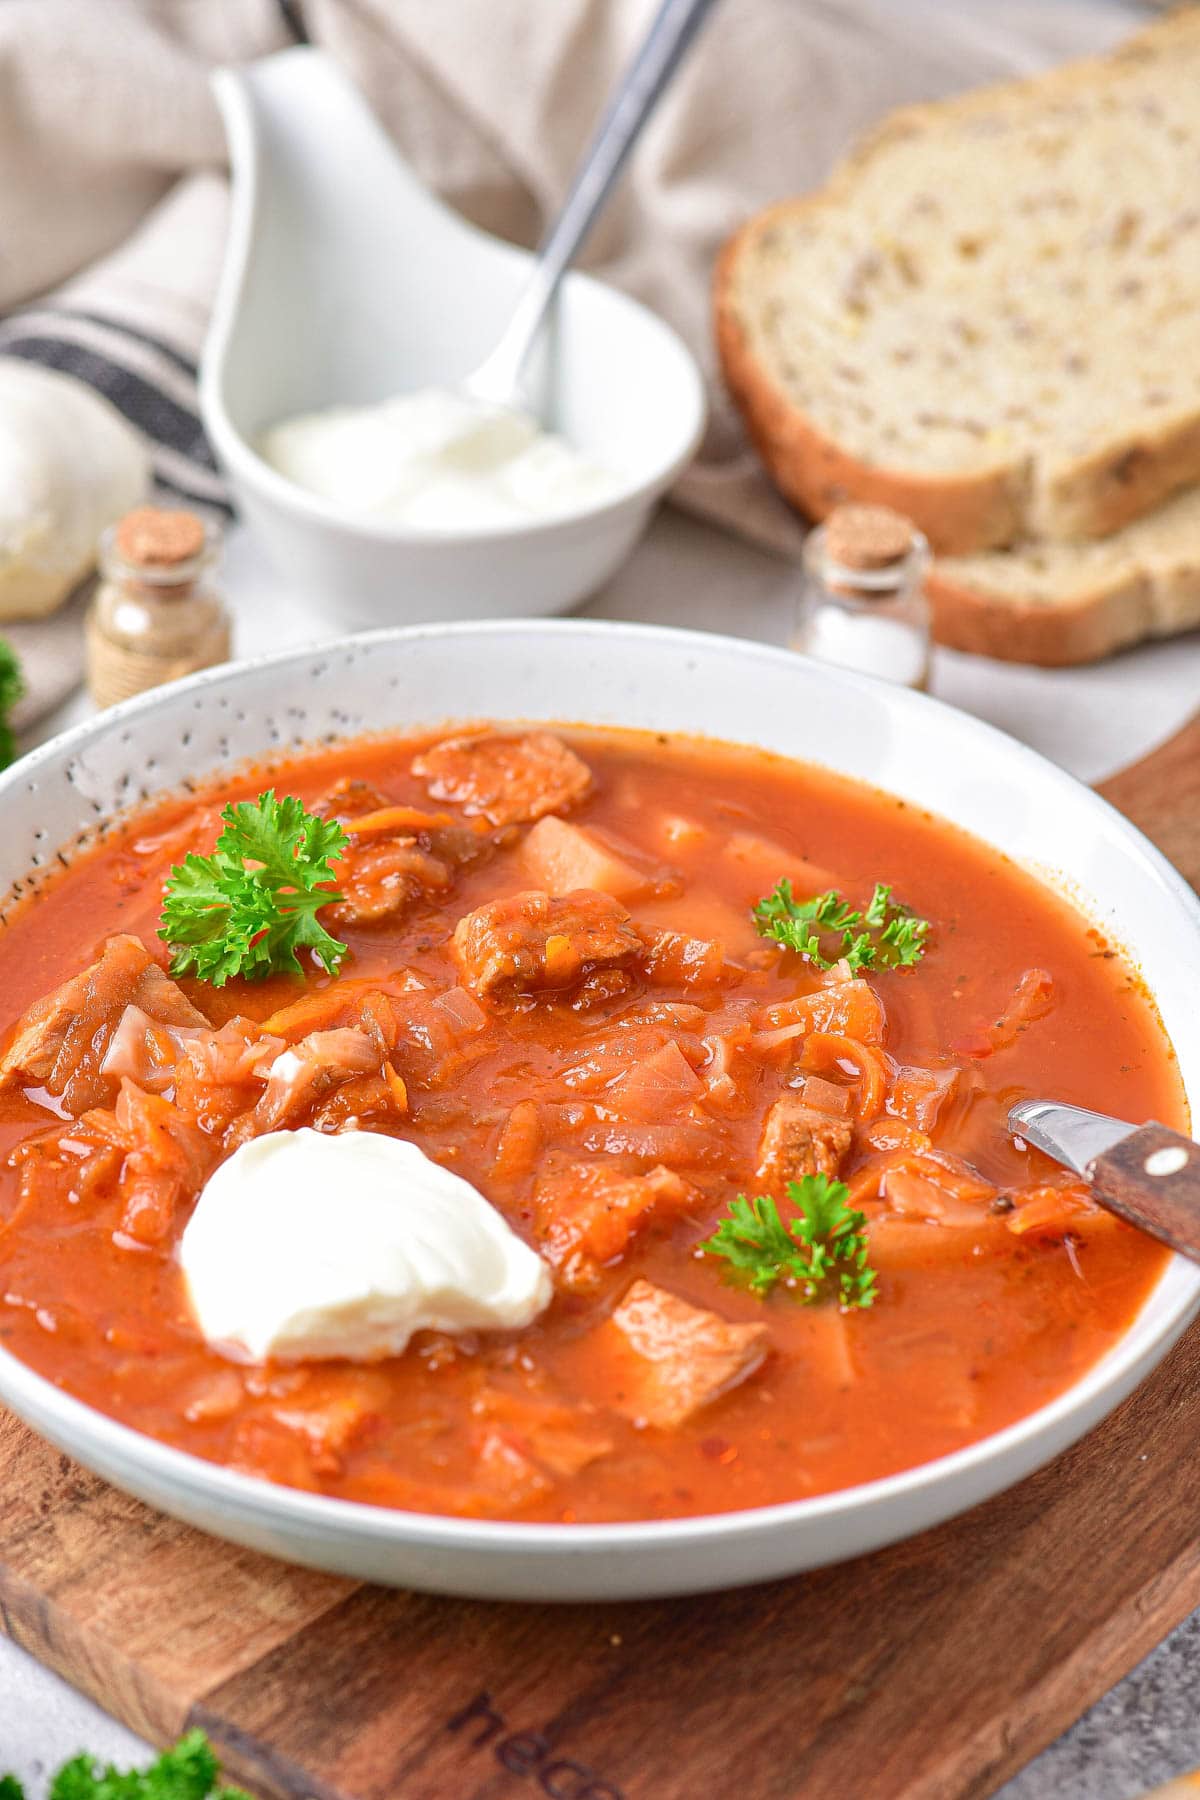 bowl of red borscht soup on wooden board with sour cream on top and slices of bread behind.